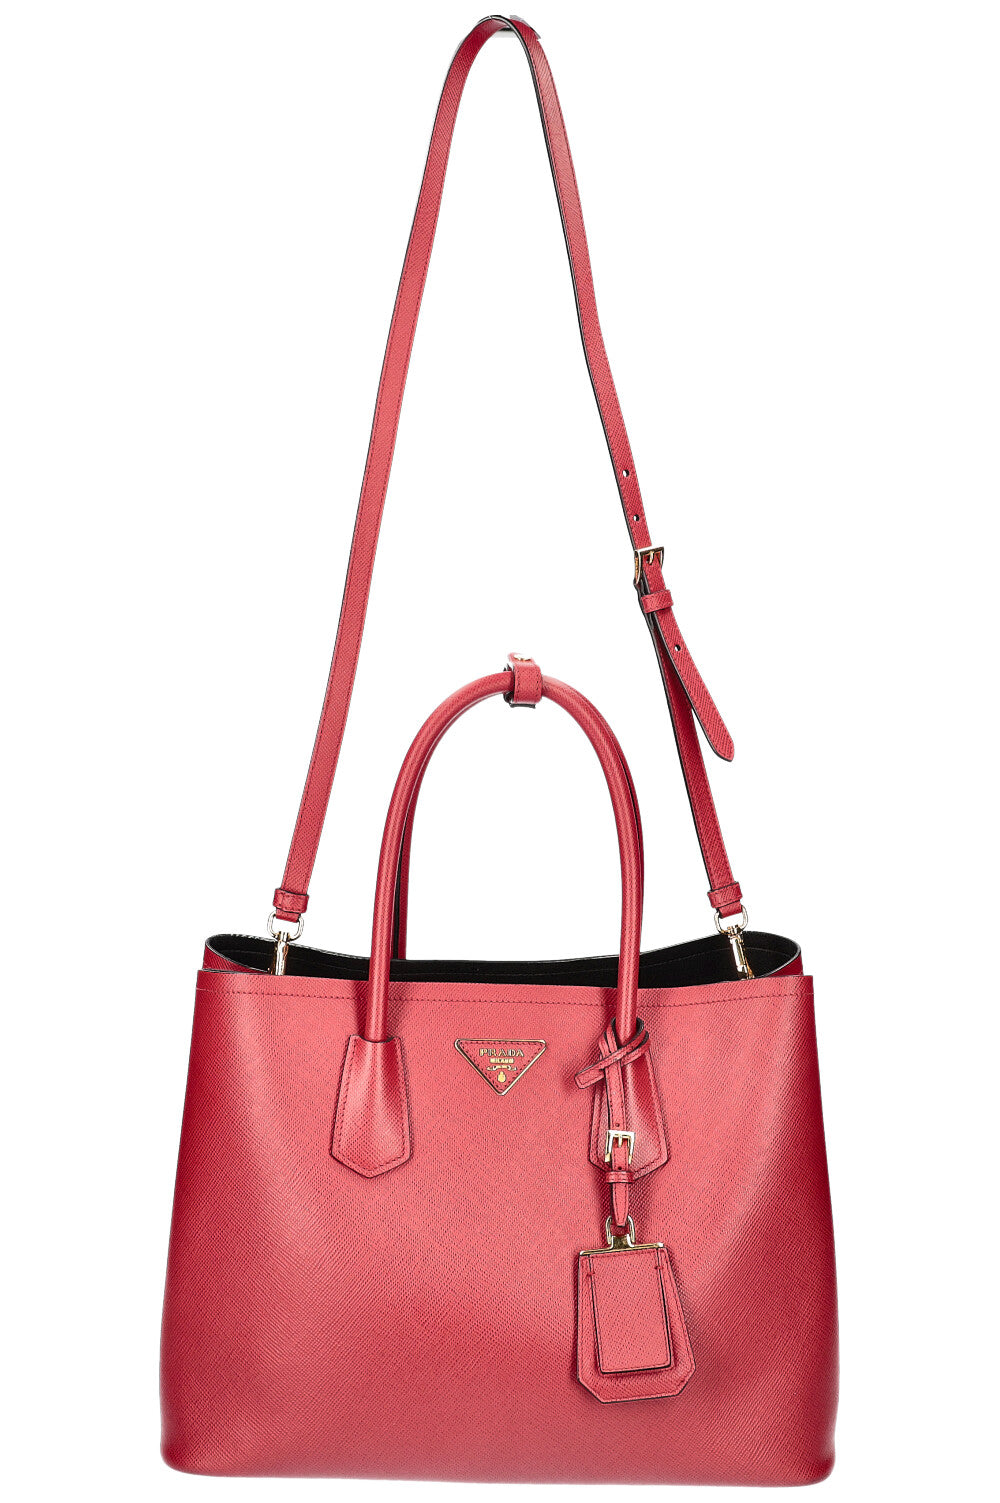 PRADA Large Double Tote Bag Saffiano Leather Red